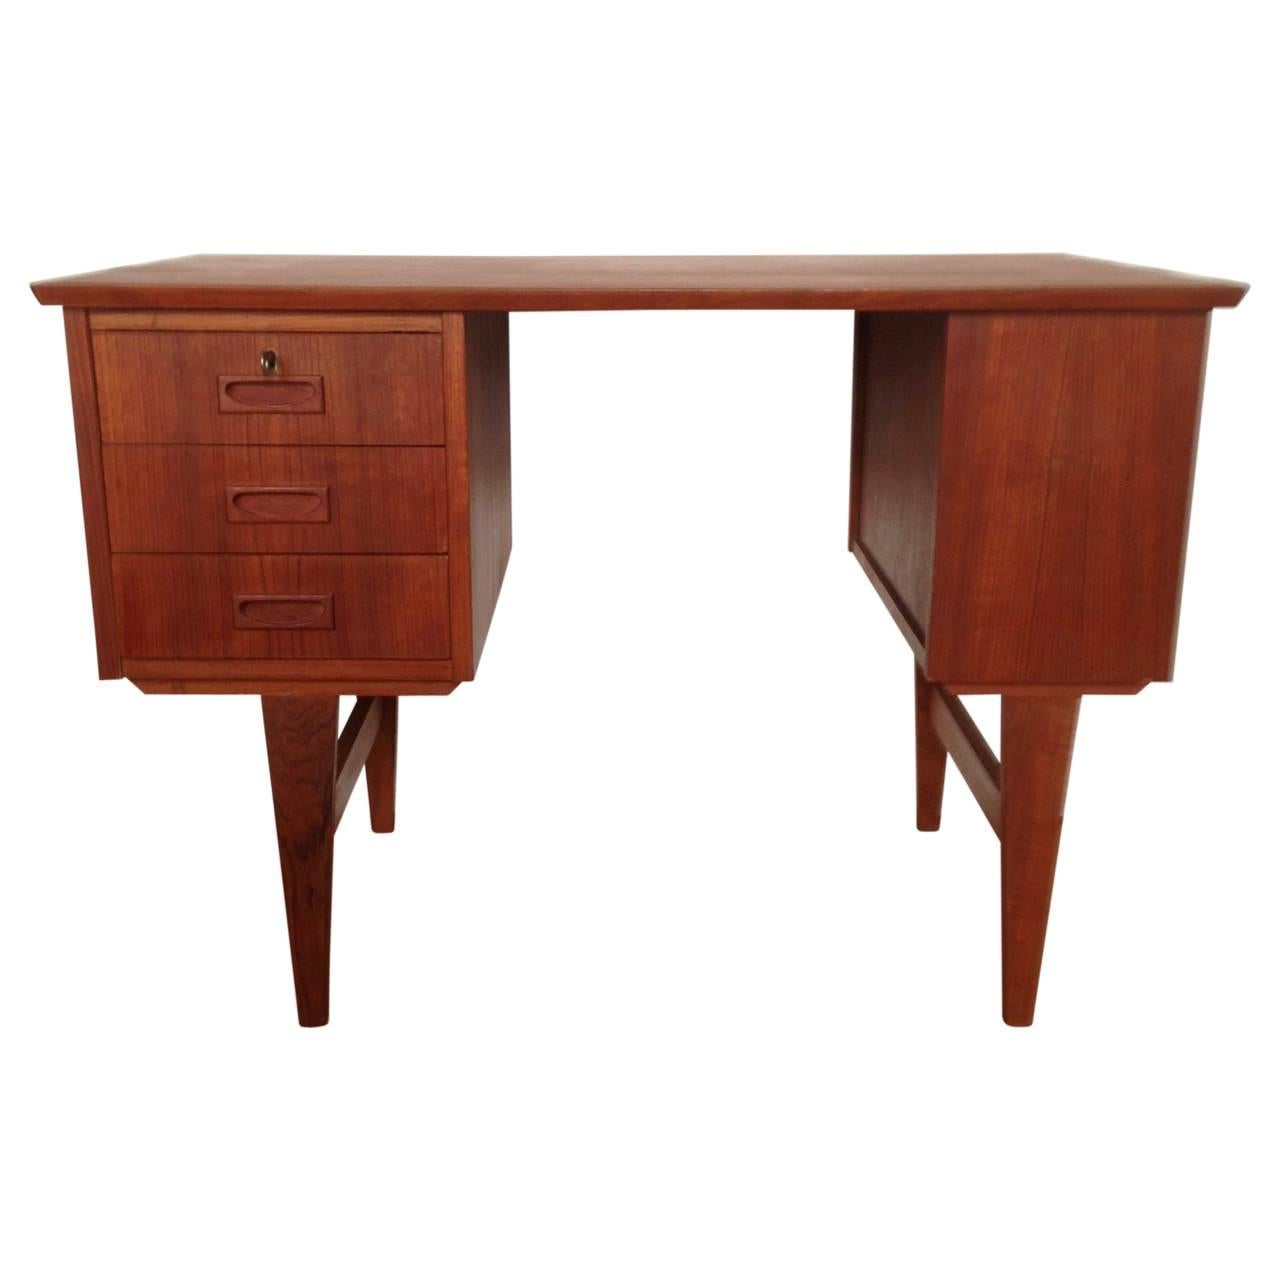 Lovely little Danish Mid-Century teak desk, with three drawers, one shelf on the side and one on the back.